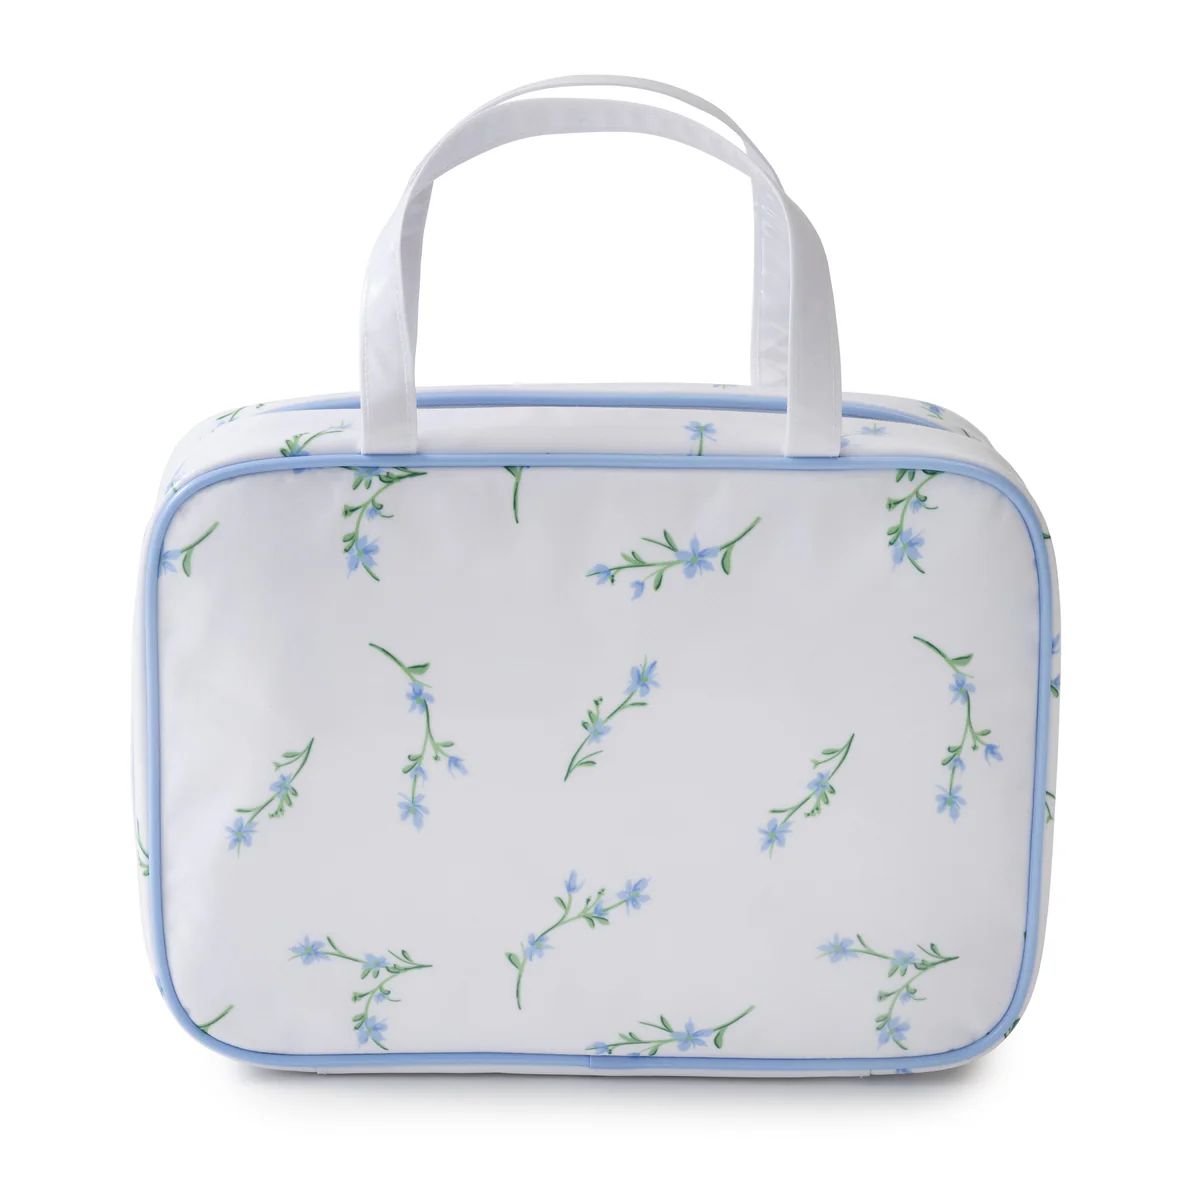 OTM For Kassatex: Floral Cosmetic Case | Over The Moon